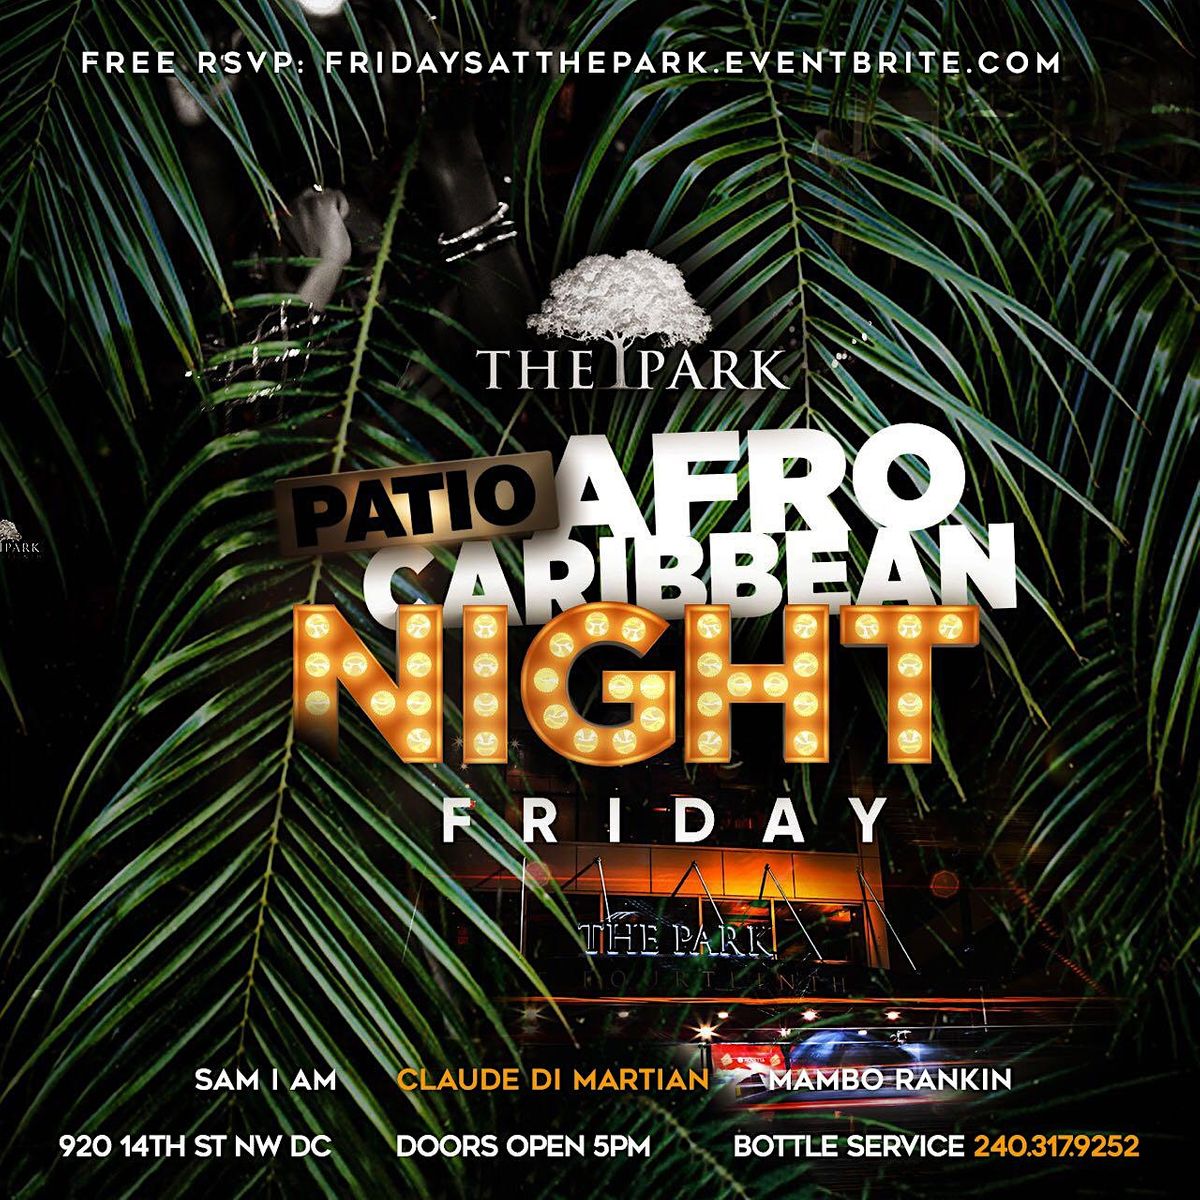 Afro-Caribbean Friday Nights at The Park! #ParkPatio